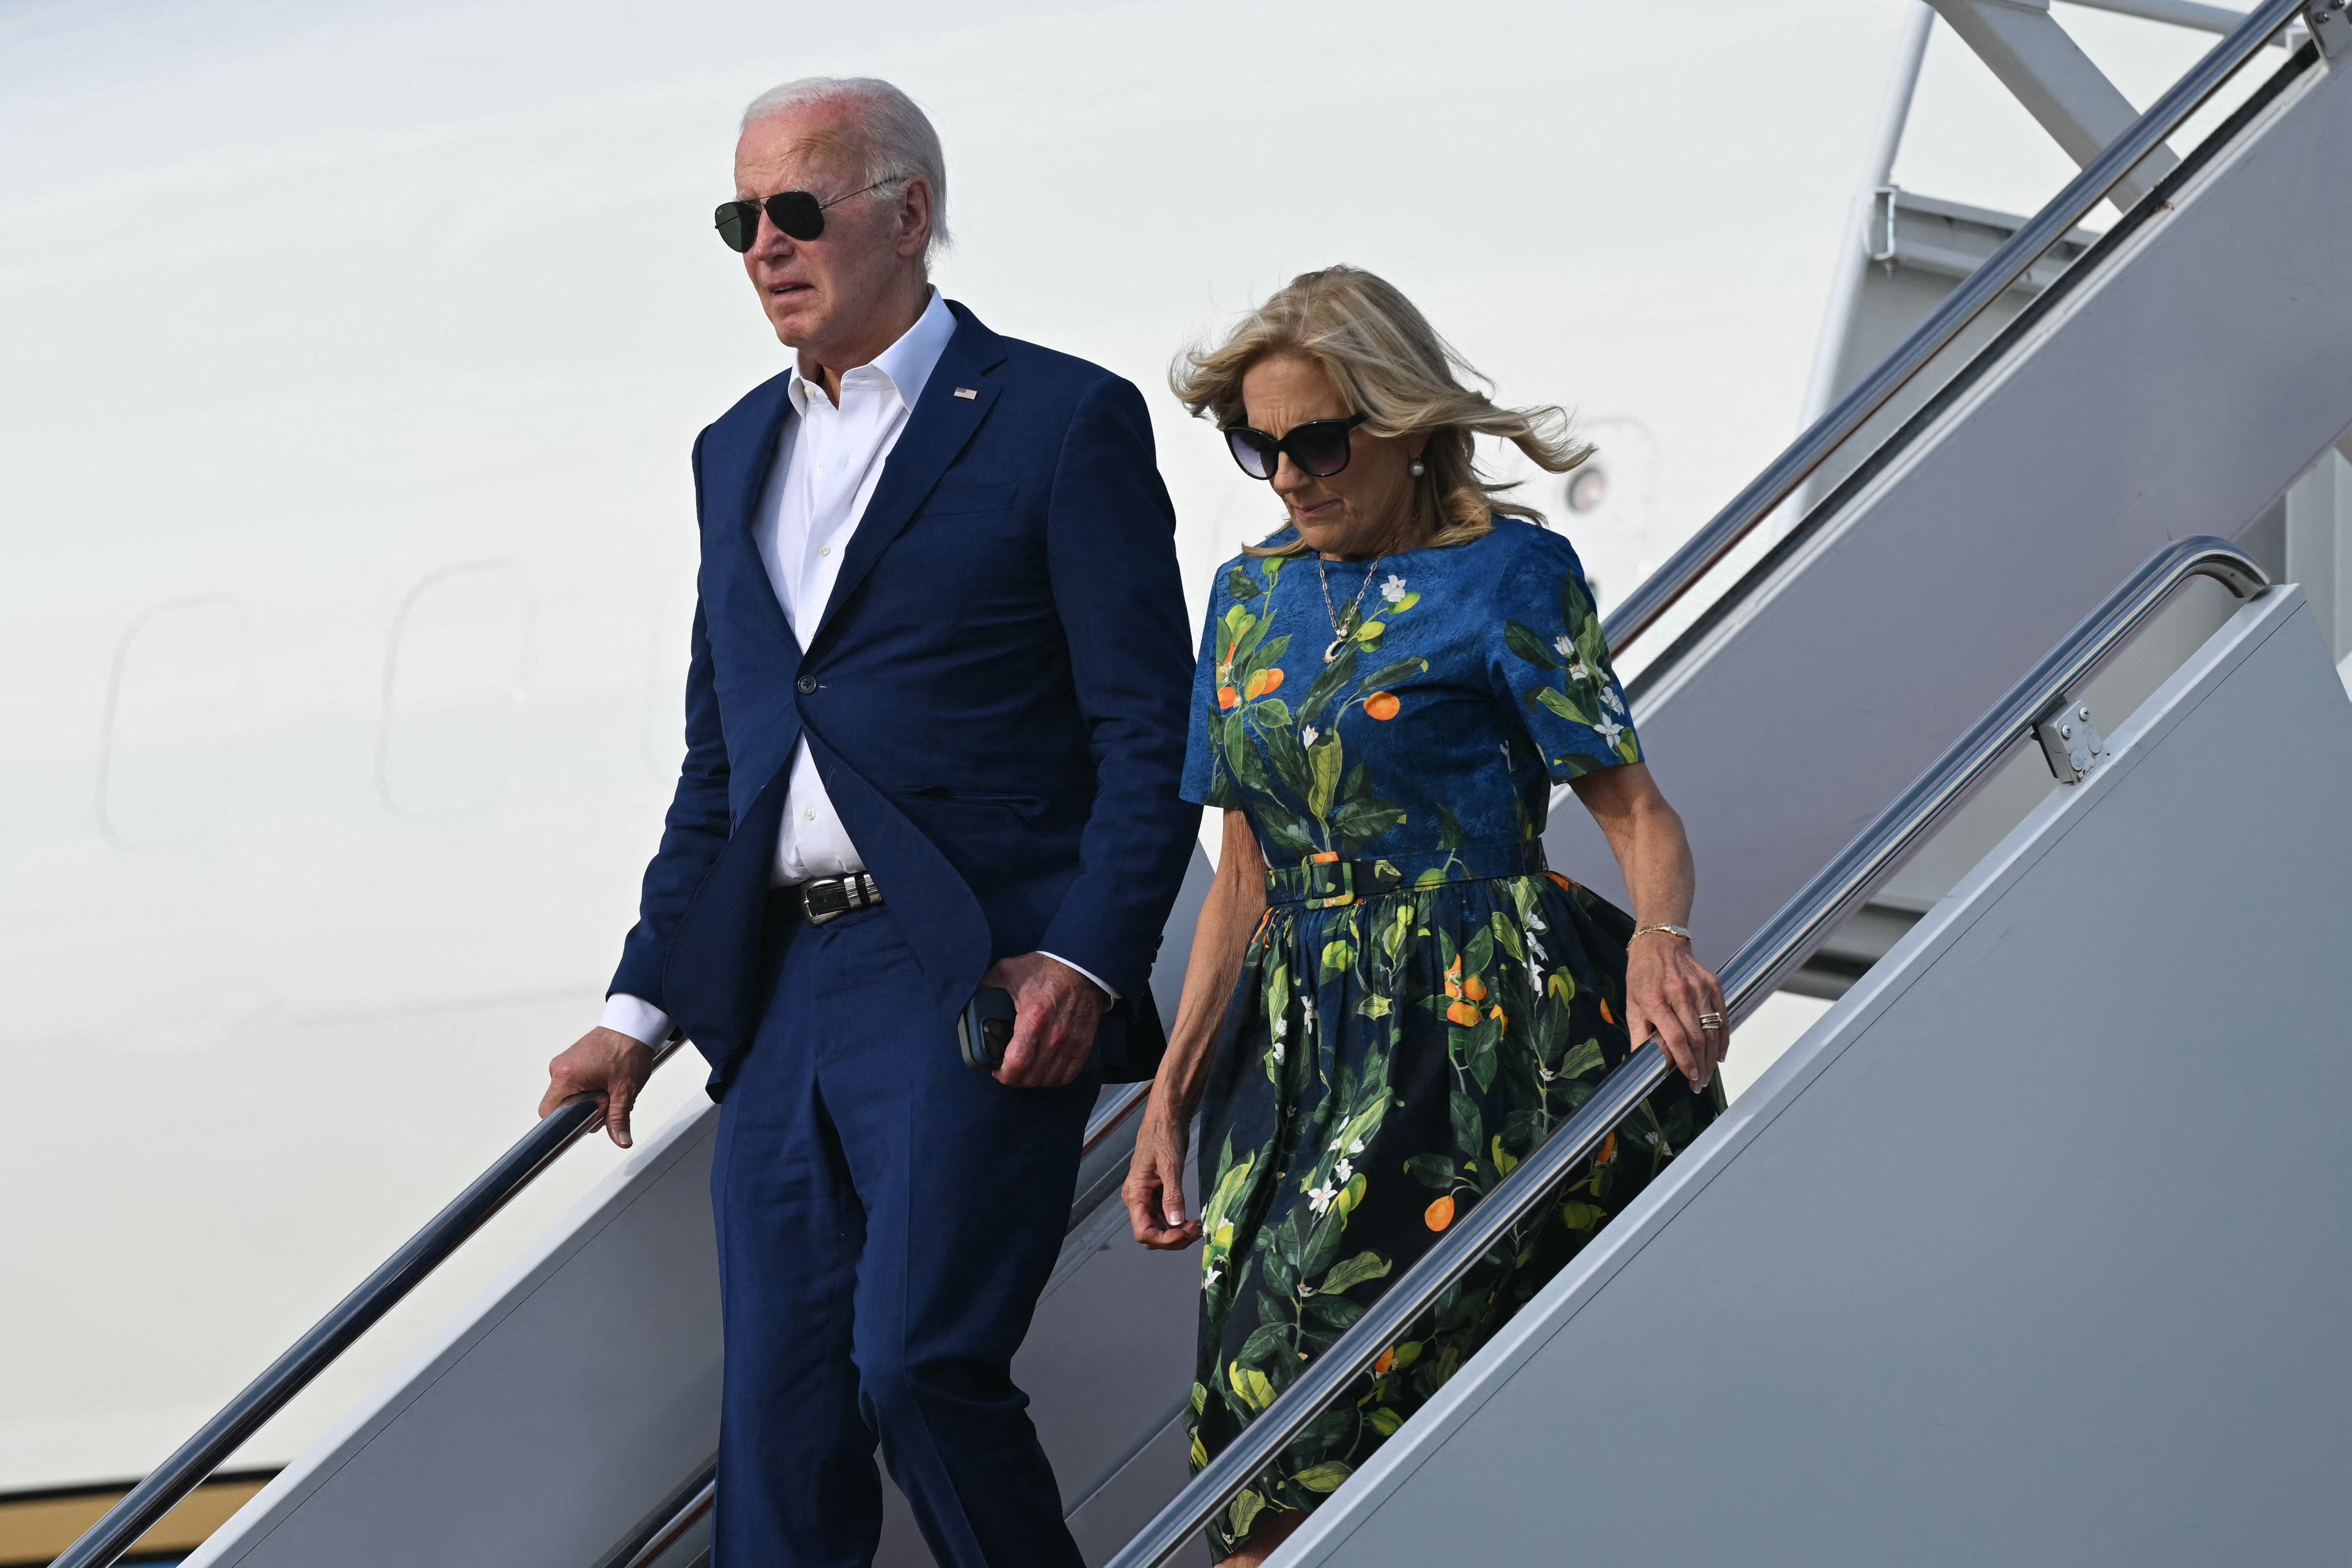 Republicans give Trump a pass on accountability. Biden needs that from Democrats.